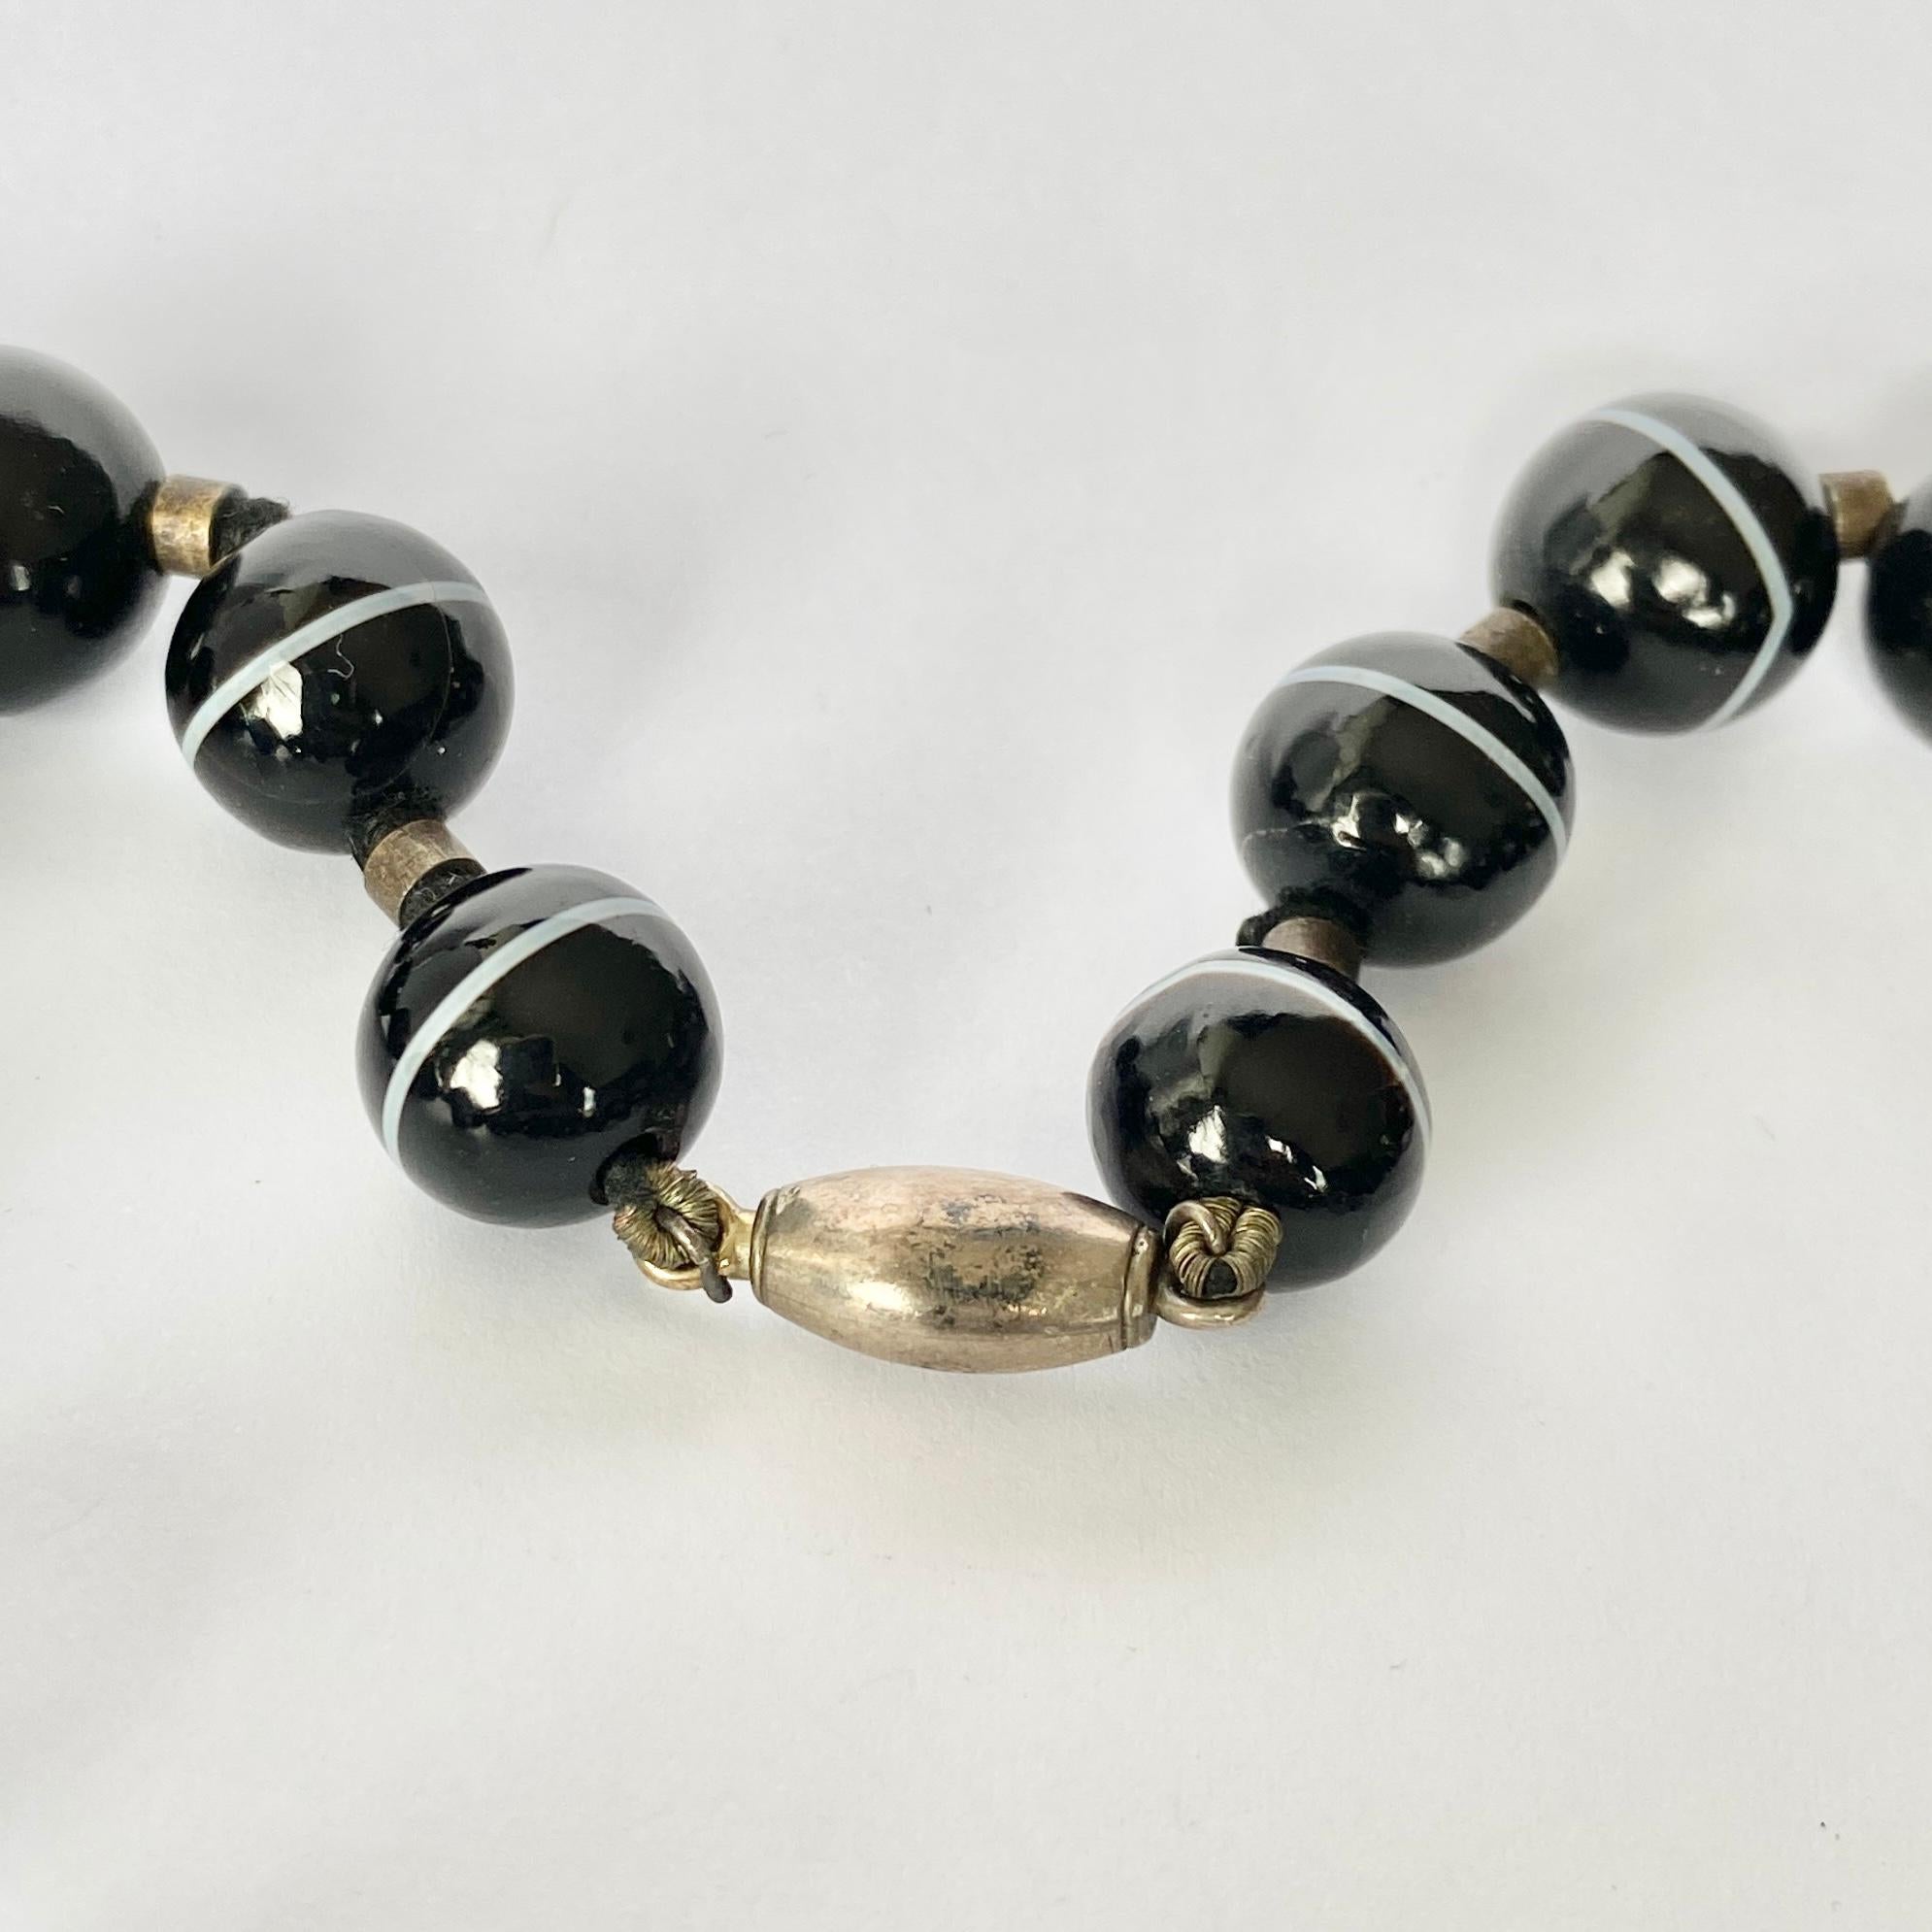 The black agate beads are gorgeous and glossy. The white band which runs through each band is chunky and looks bright next to the dark bead. 

Length: 36.5cm 

Weight: 77.5